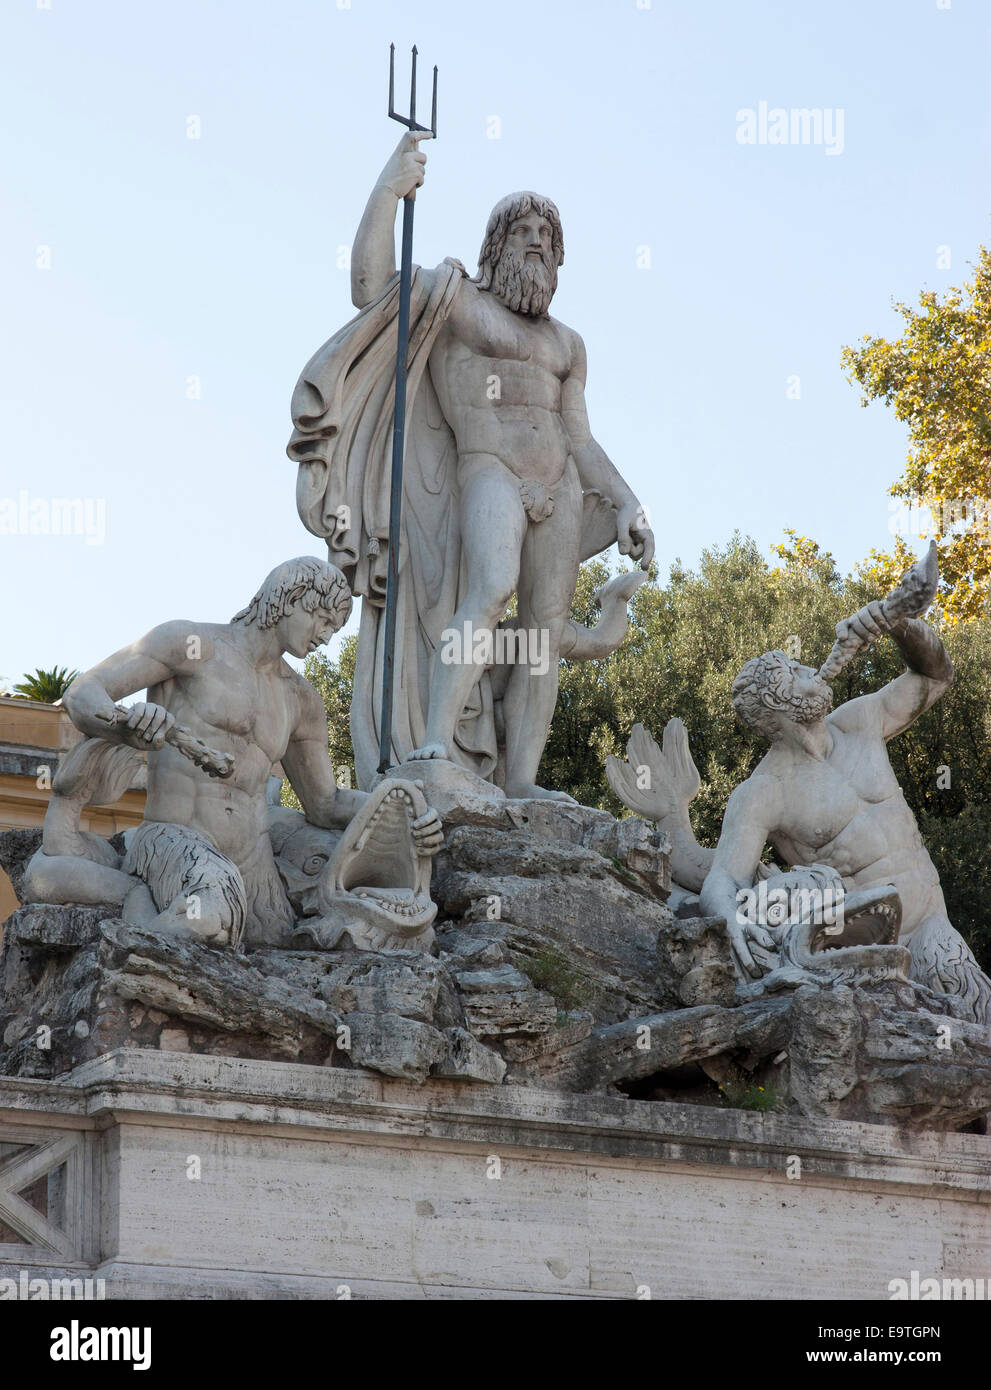 historical statue of a church in Italy Stock Photo